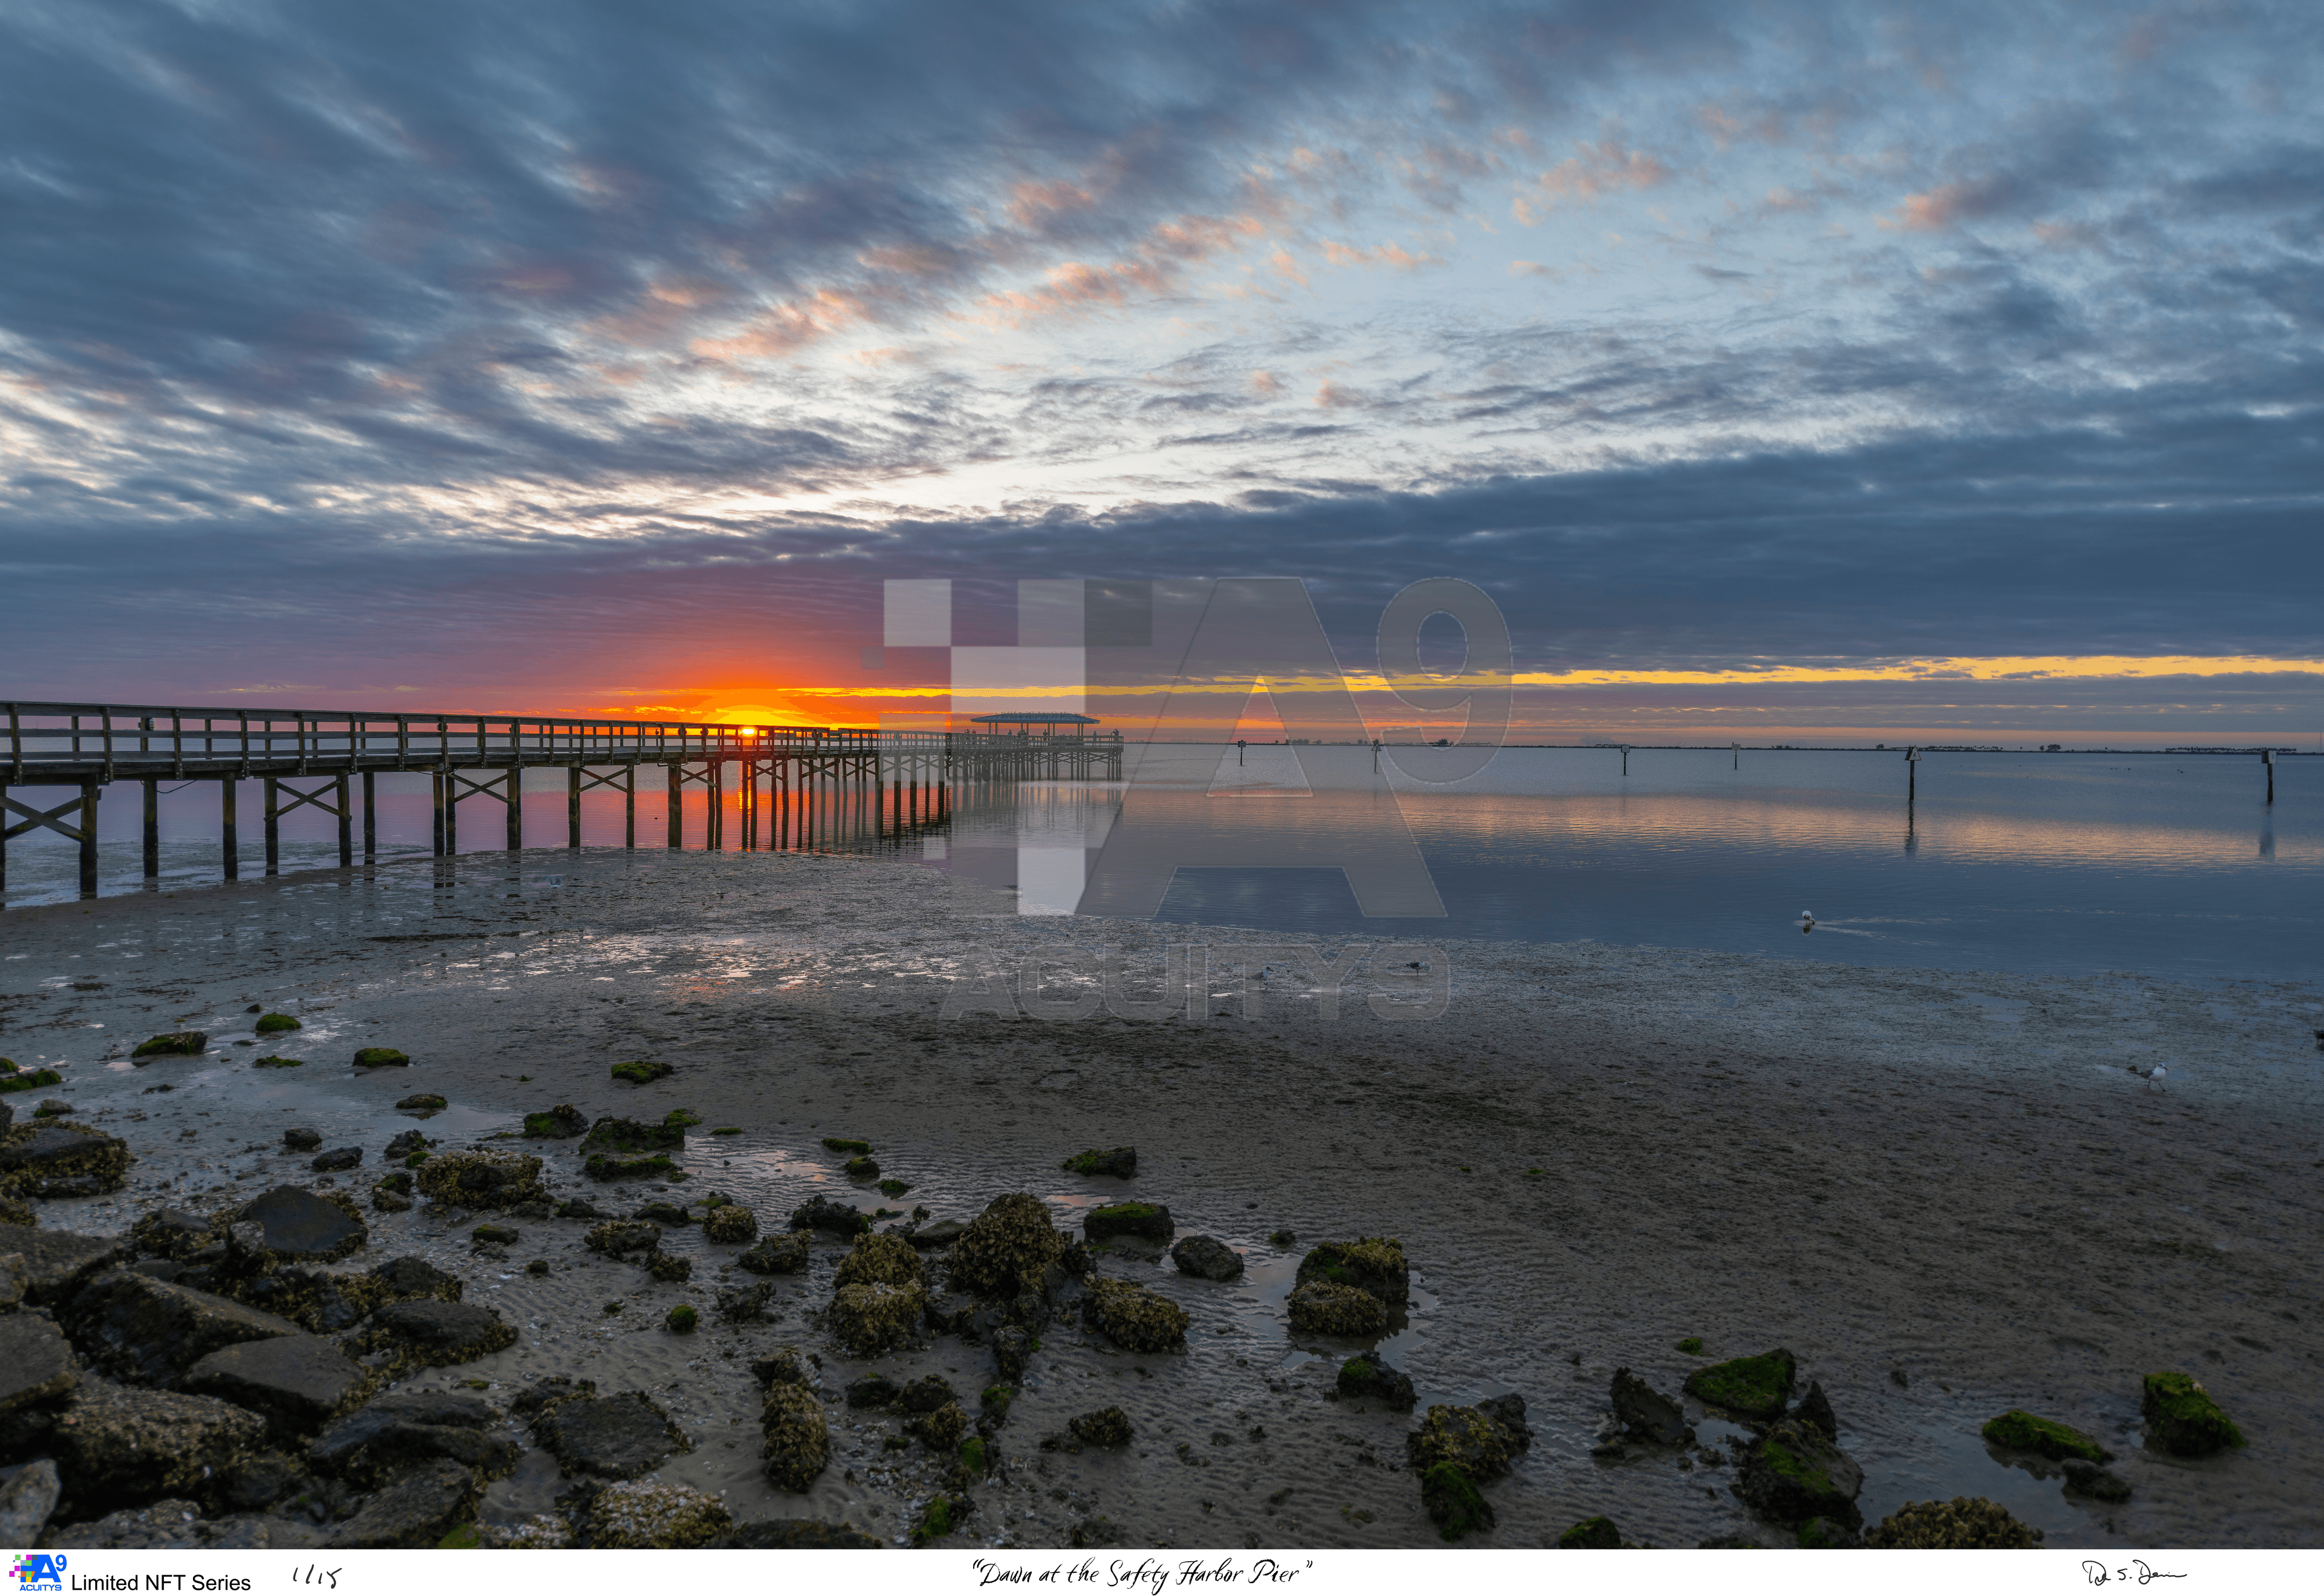 "Dawn at the Safety Harbor Pier"